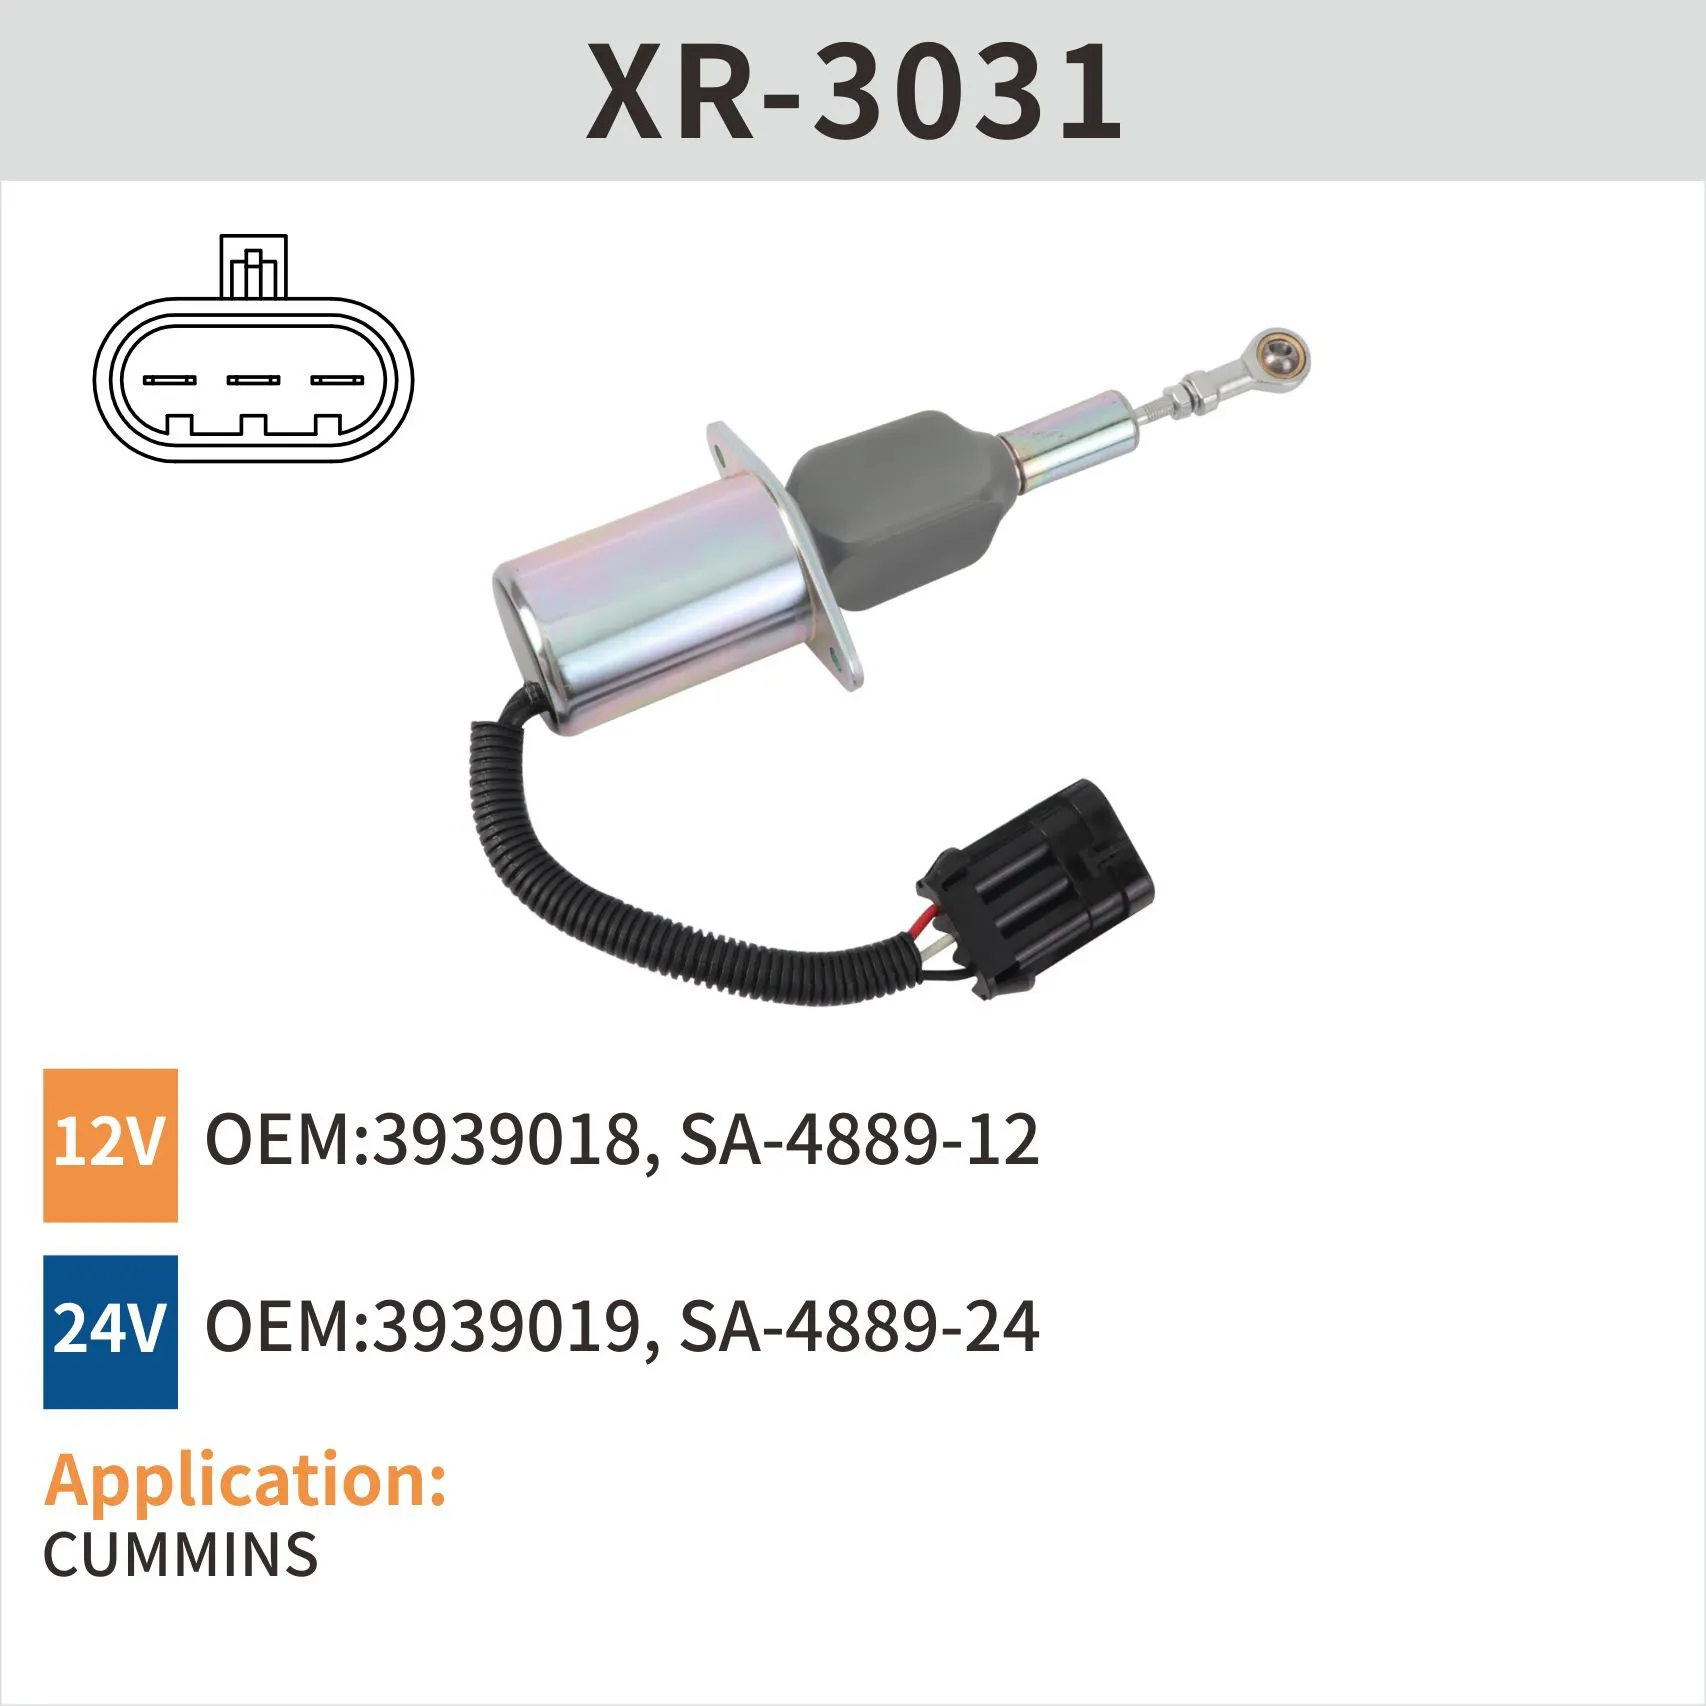 Cummins Engine Solenoid 335lc-7 For Hyundai Excavator Available Also Other Parts For Cummins Hyundai